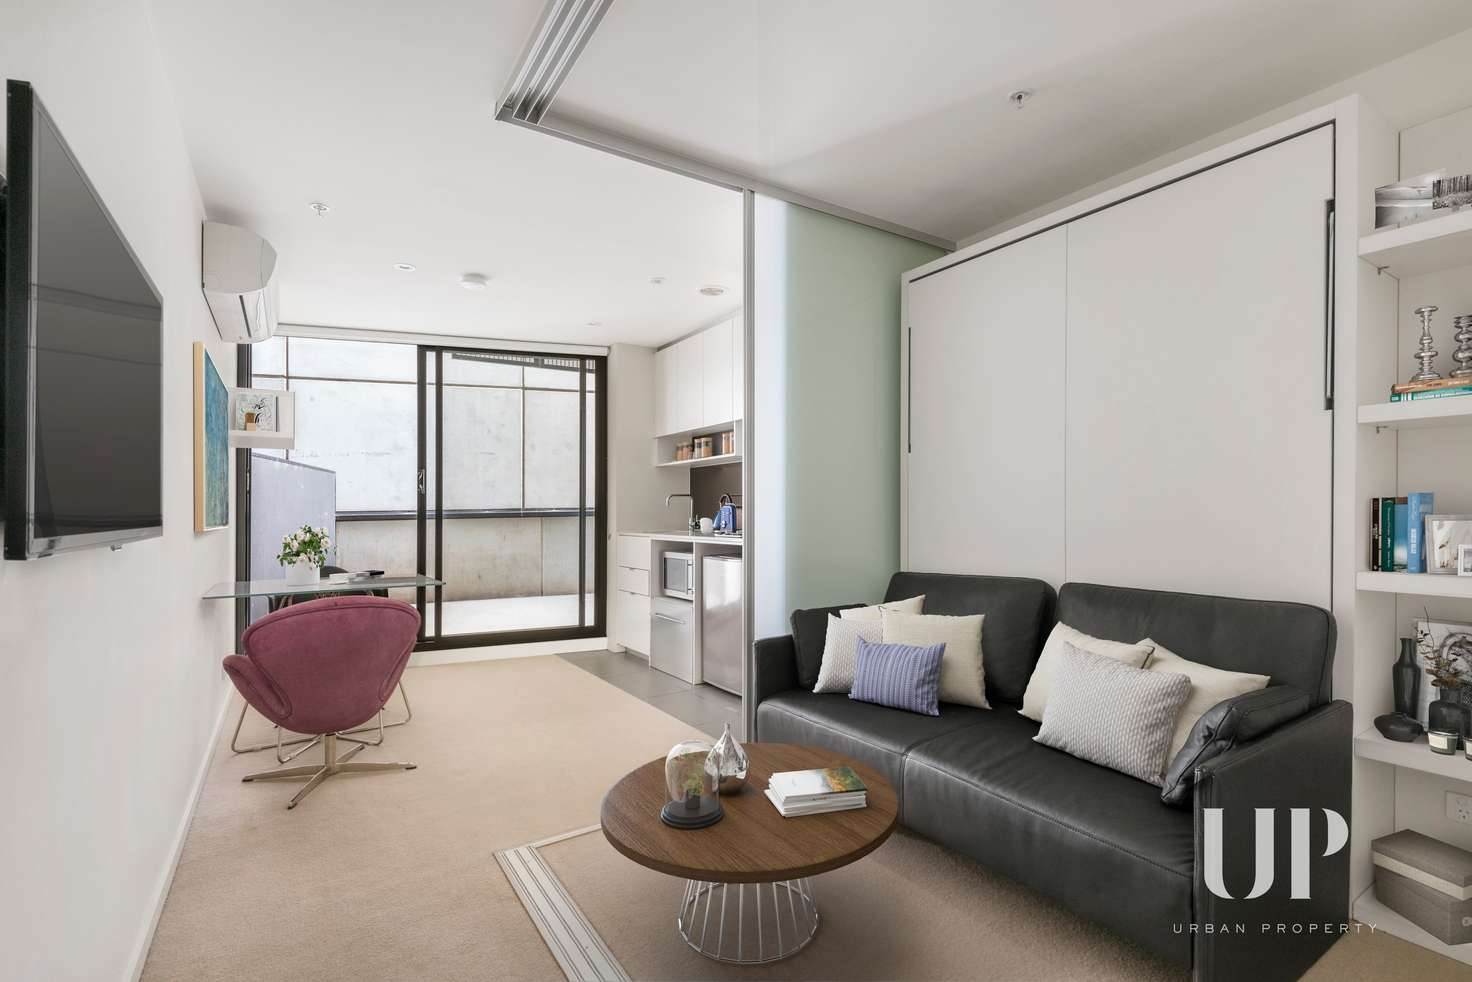 Main view of Homely apartment listing, 1302/243 Franklin Street, Melbourne VIC 3000